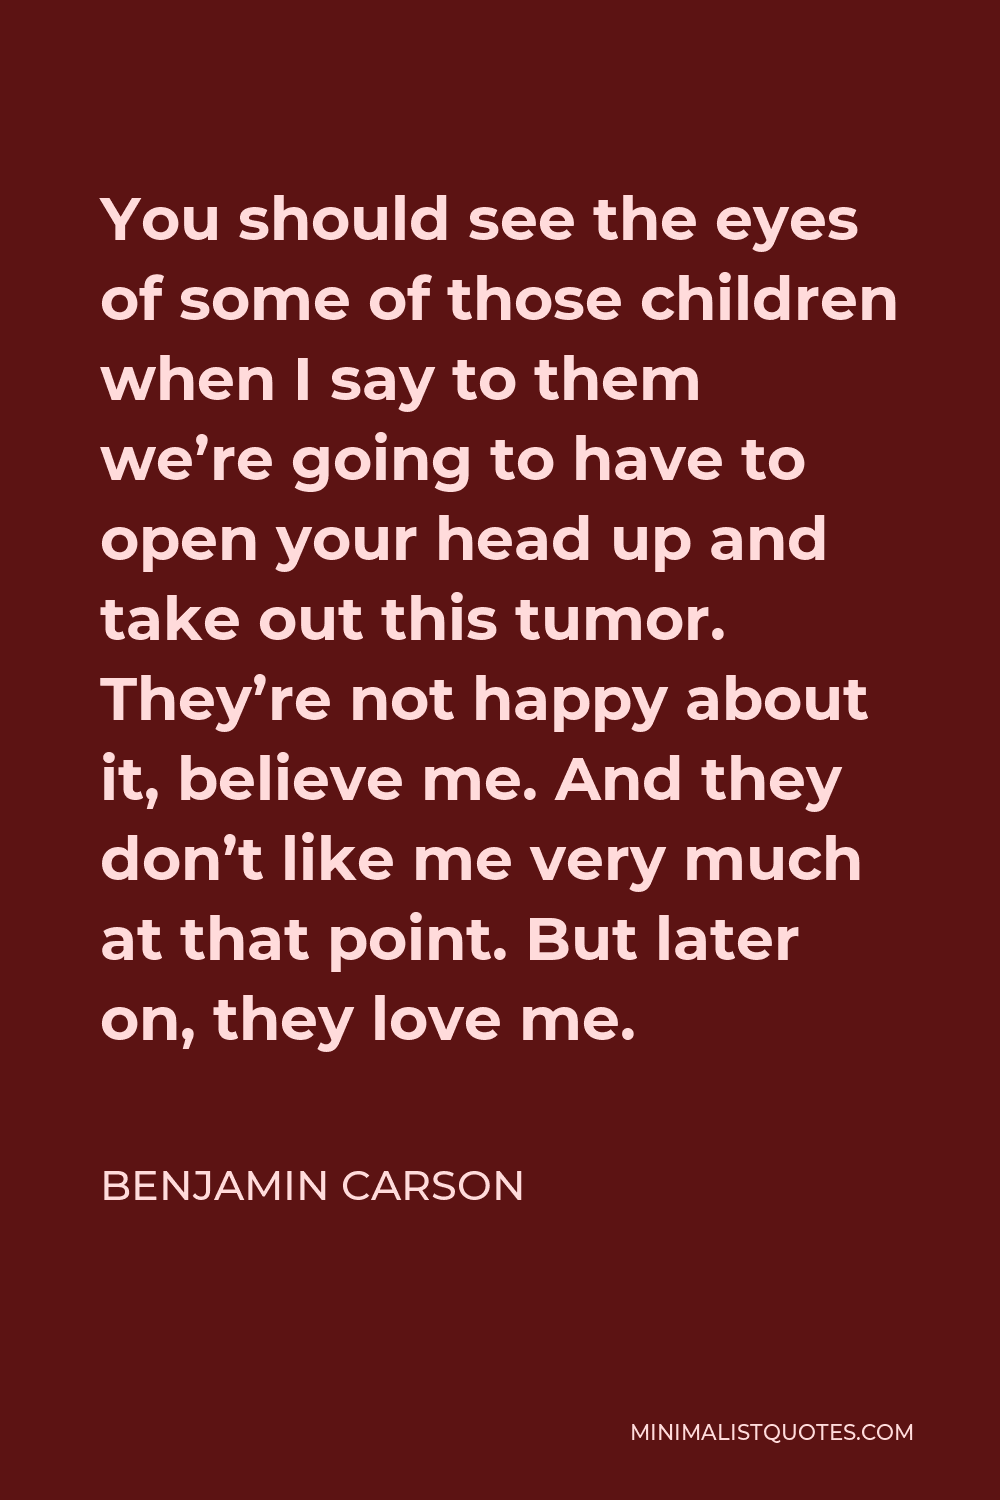 Benjamin Carson Quote - You should see the eyes of some of those children when I say to them we’re going to have to open your head up and take out this tumor. They’re not happy about it, believe me. And they don’t like me very much at that point. But later on, they love me.